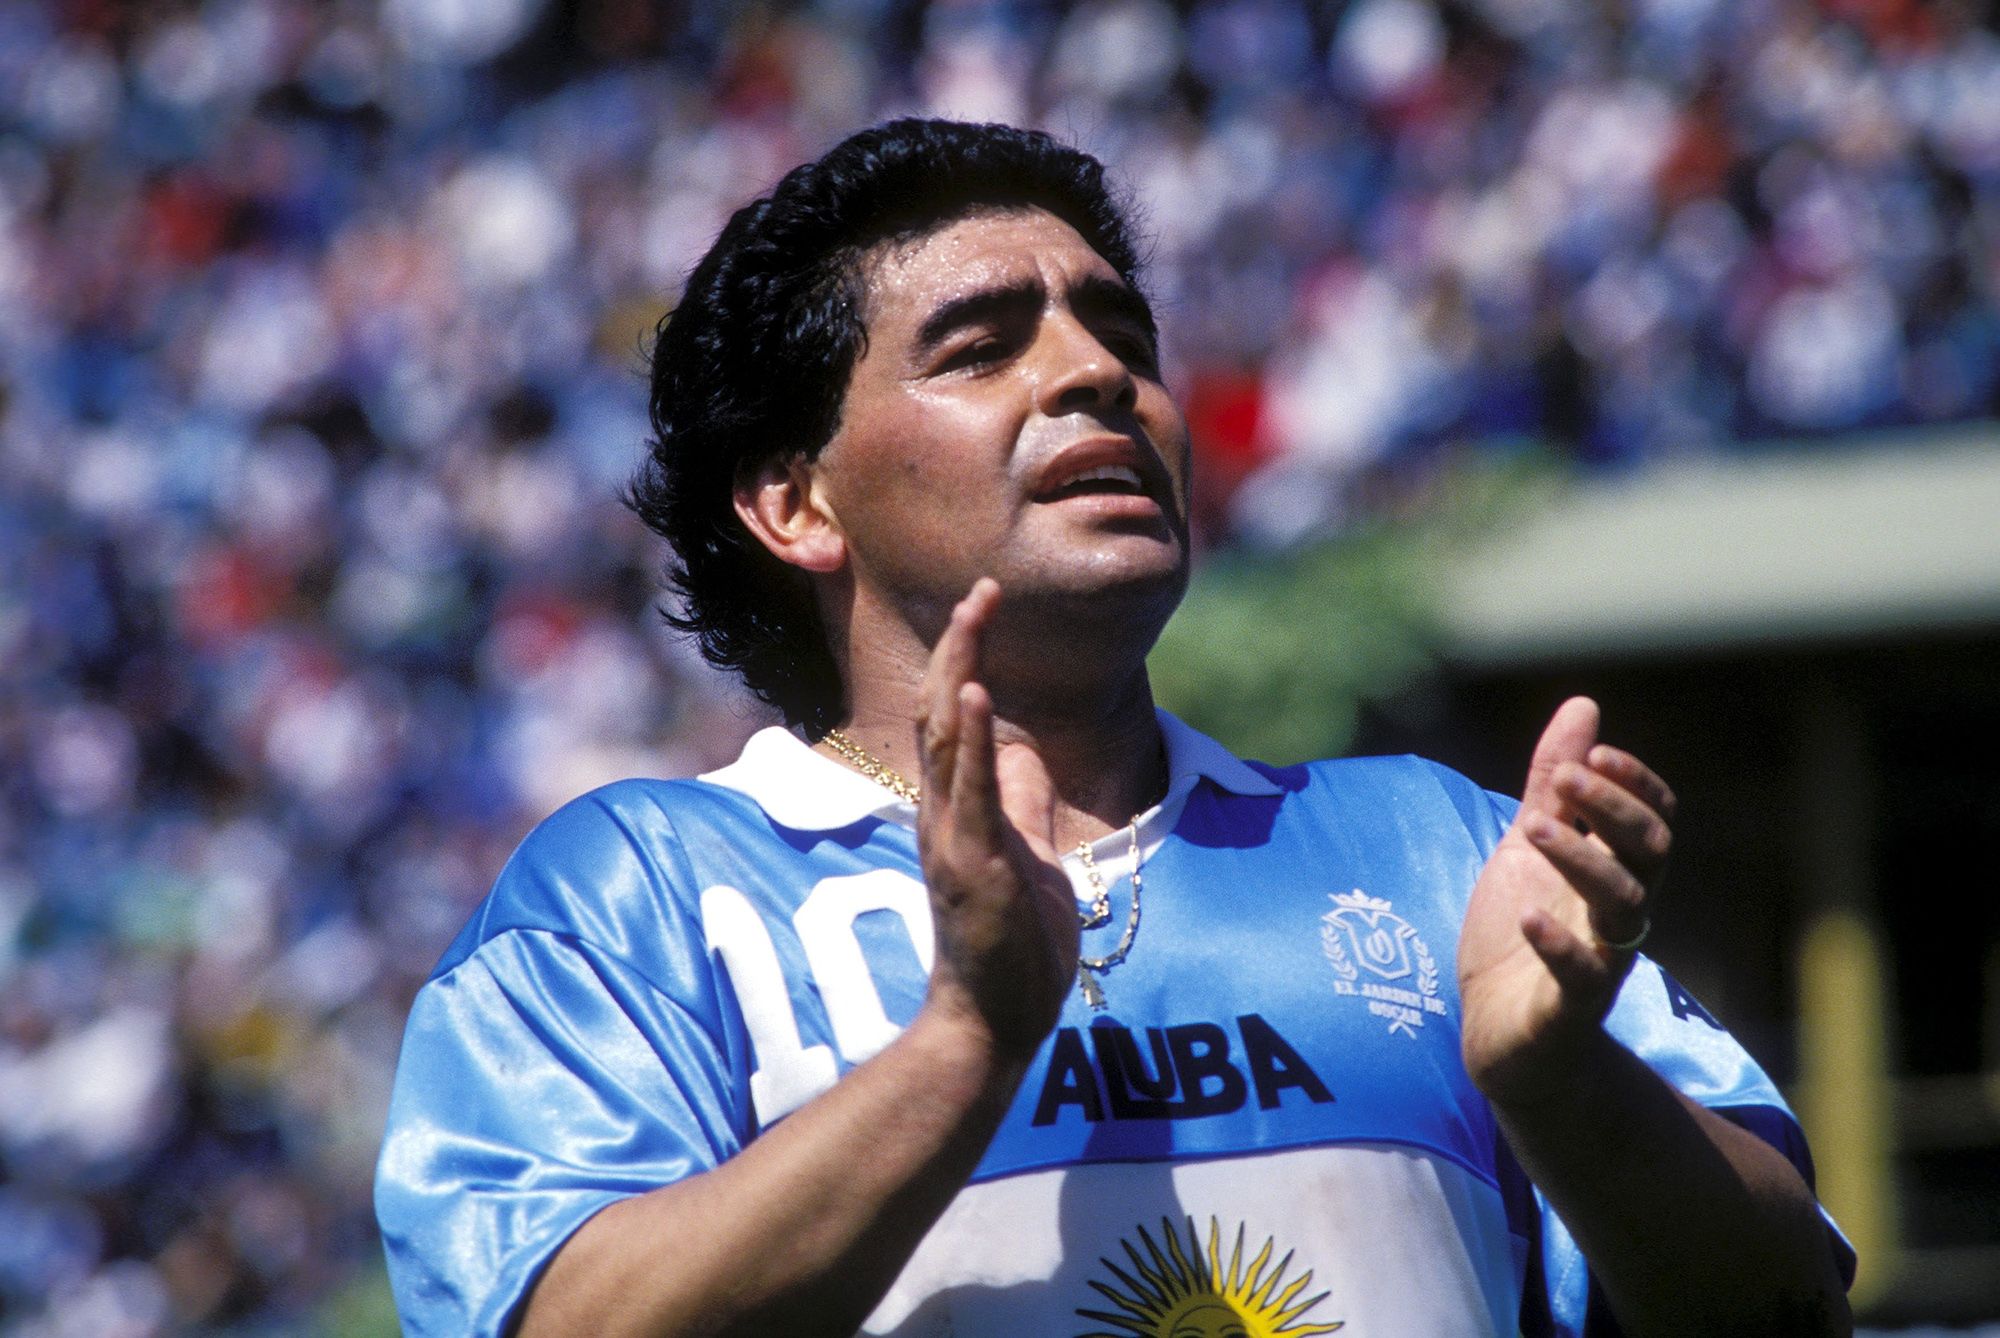 10 best soccer players of all time, from Diego Maradona to Lionel Messi